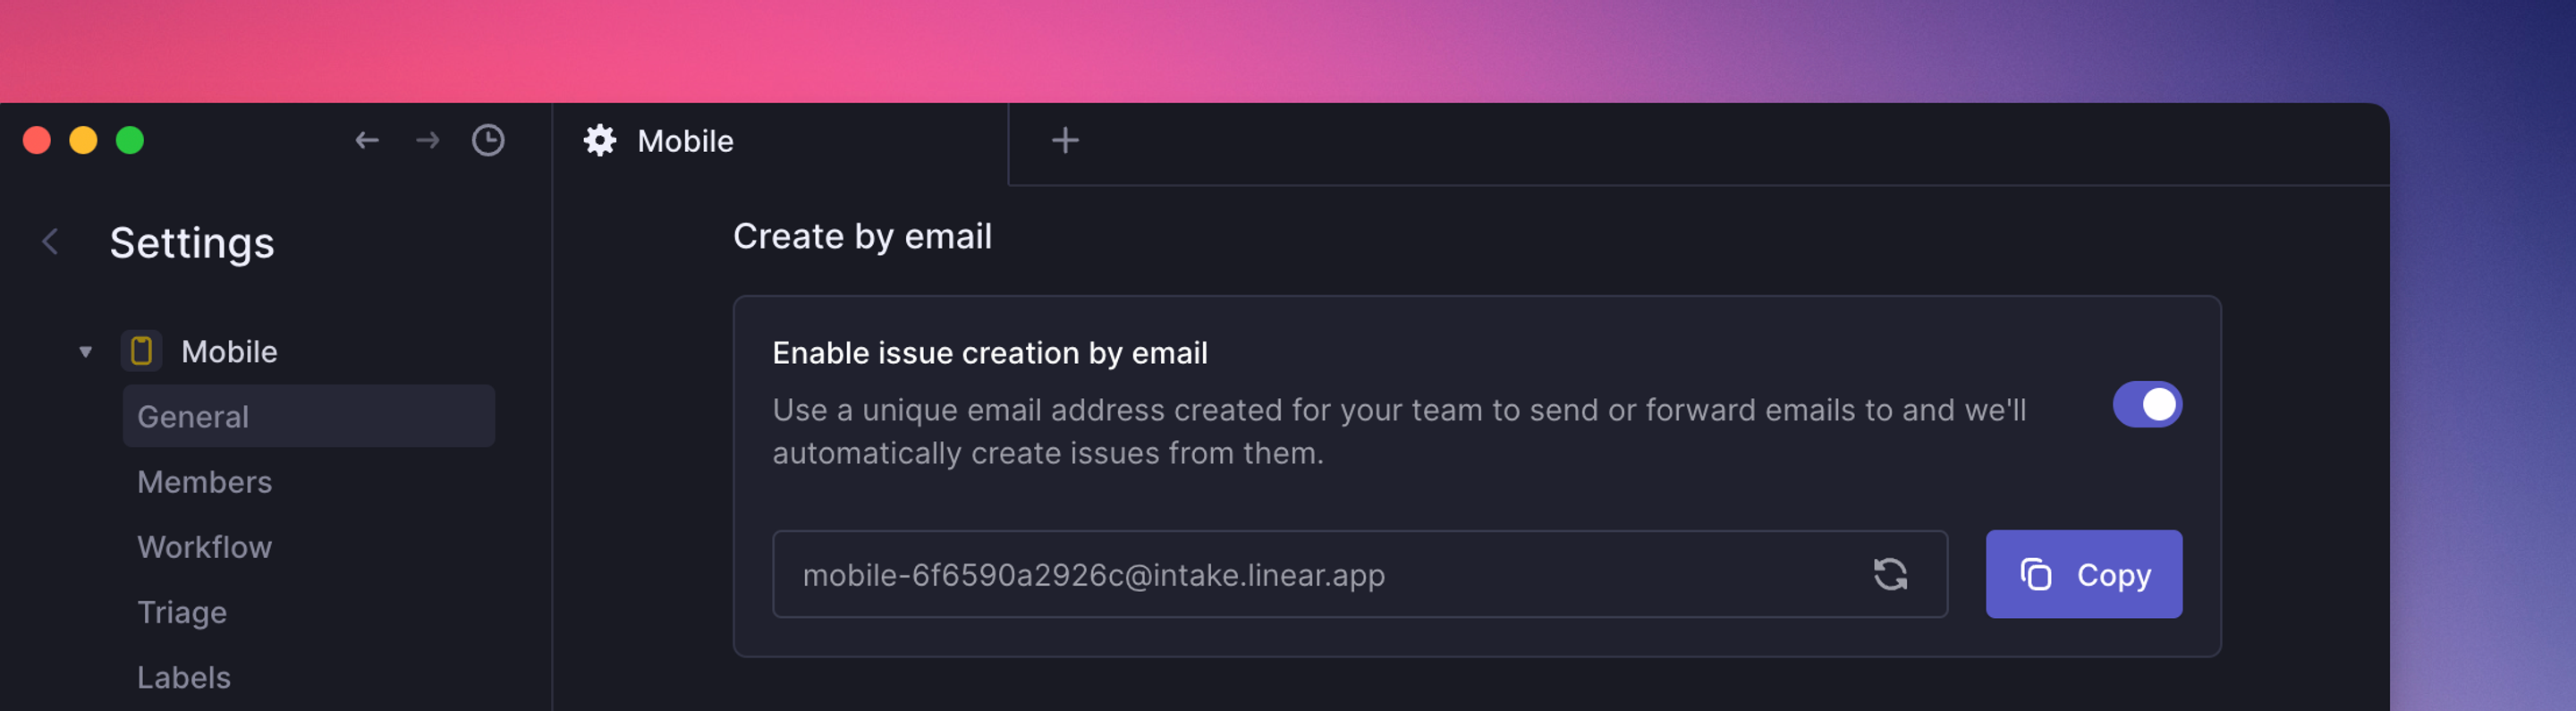 Screenshot shows Create by email setting for a team titled "Mobile"